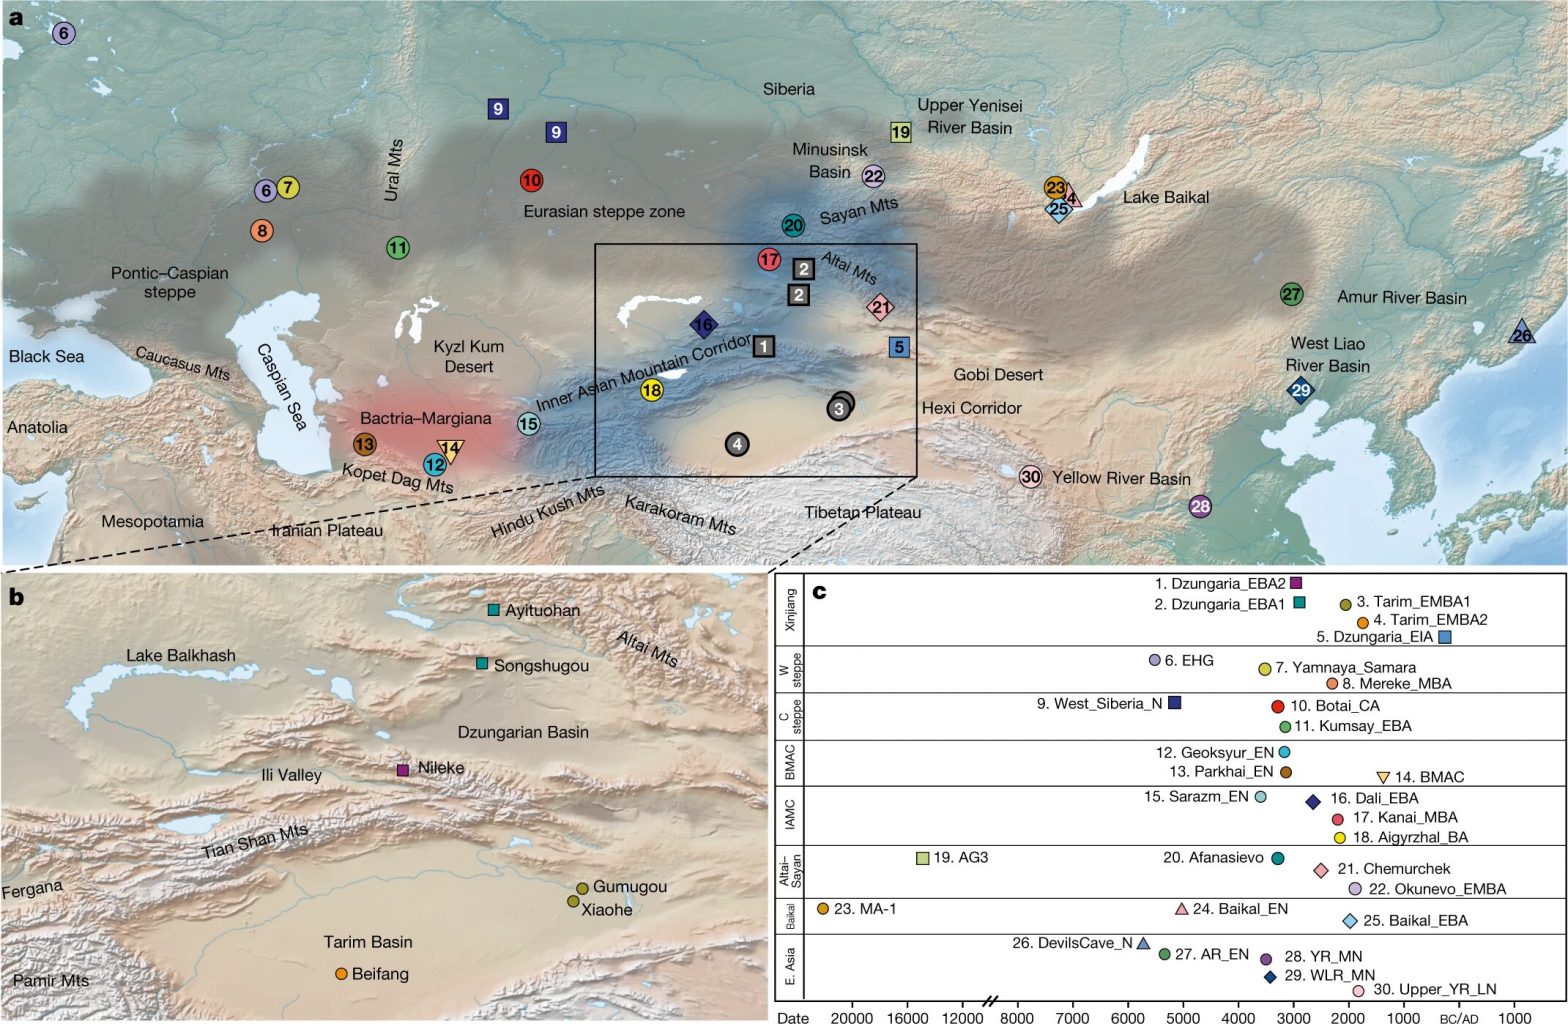 Review of archaeological sites, materials from which were studied by paleogenetics. Credit: Fan Zhang et al. / Nature, 2021